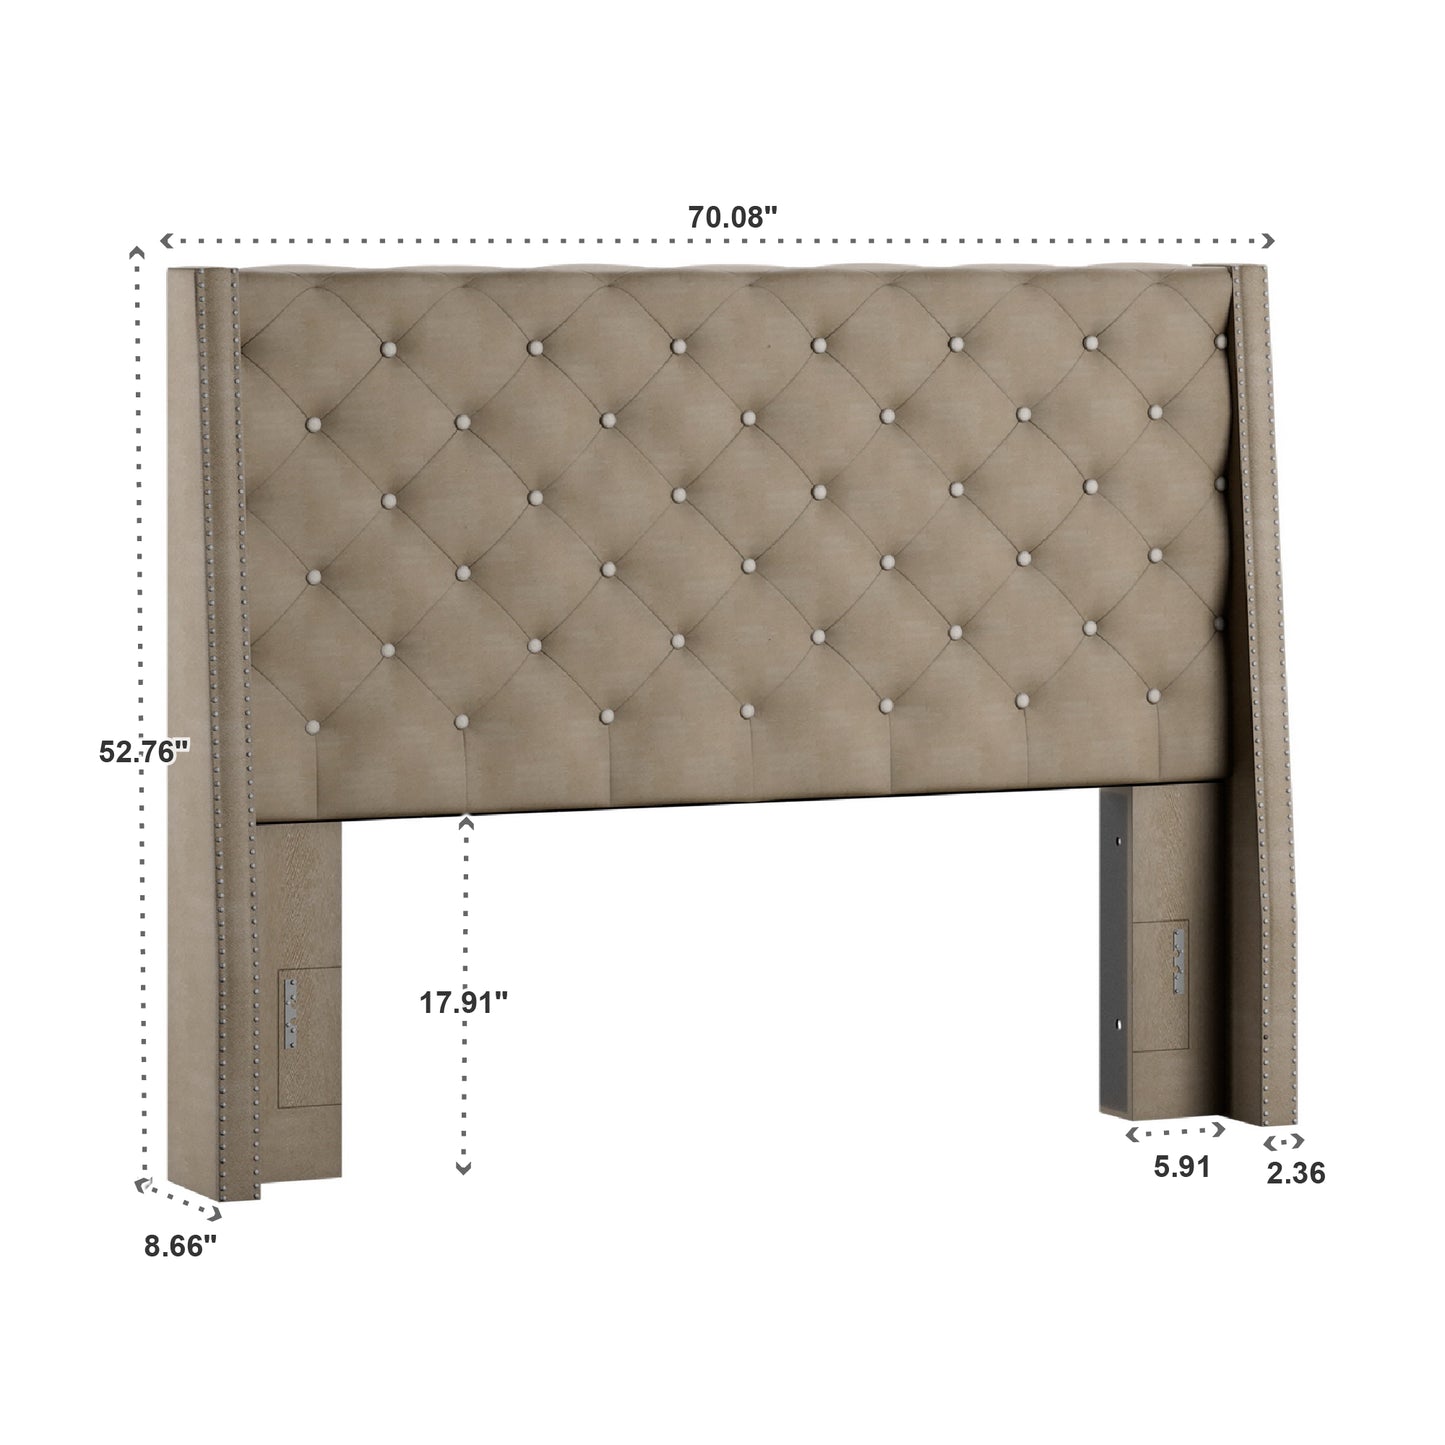 Faux Leather Crystal Tufted Headboard - Silver Grey, Queen